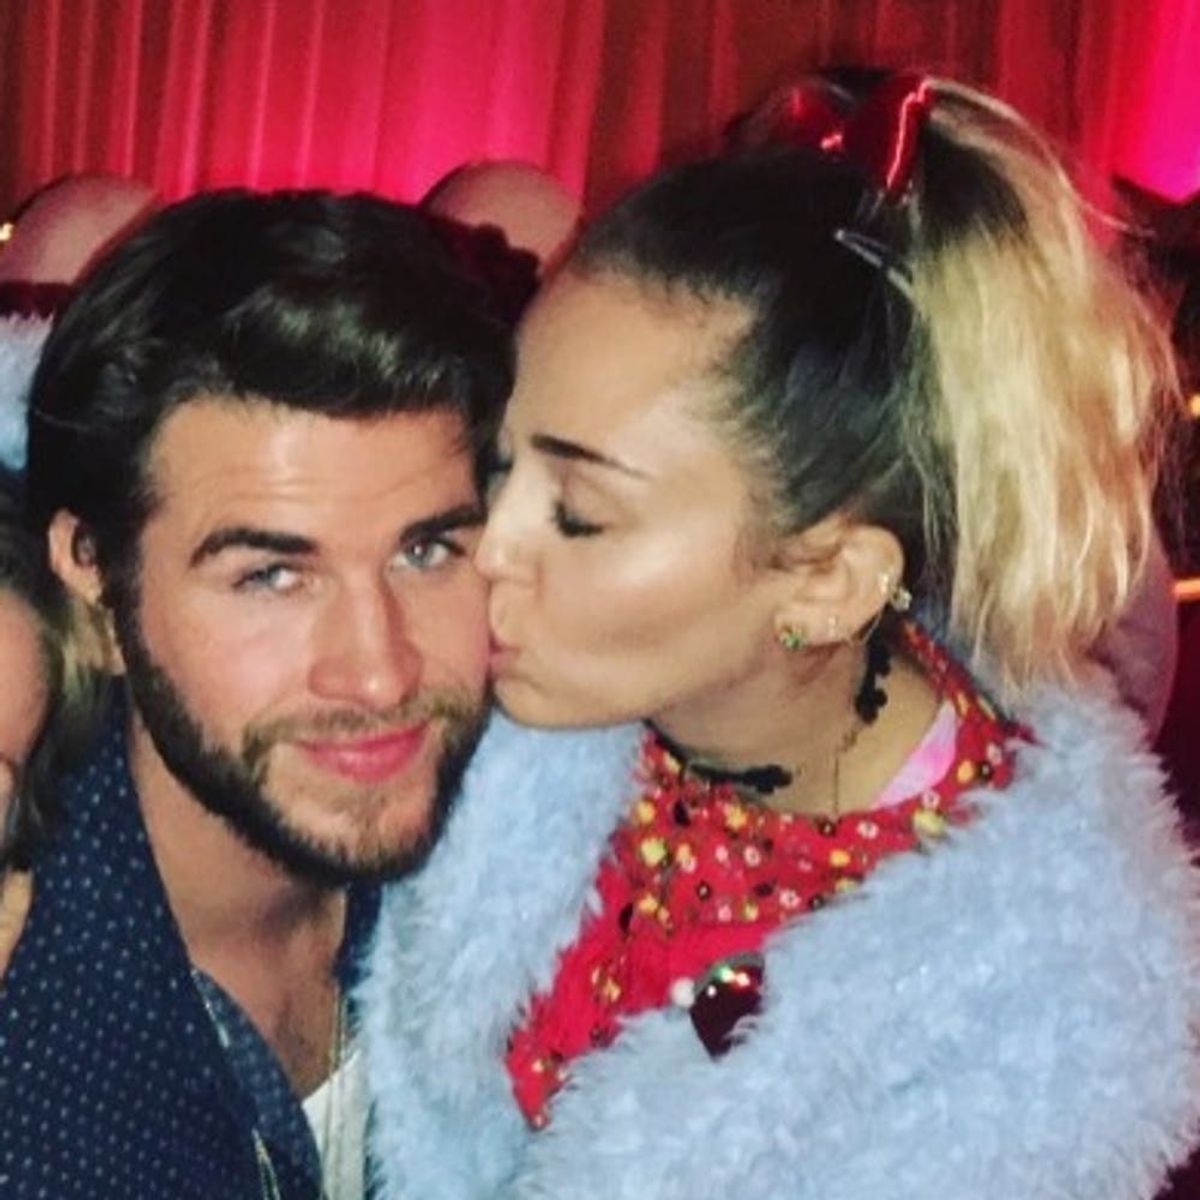 Miley Cyrus and Liam Hemsworth Have Wedding-Related Plans for Their NYE Trip